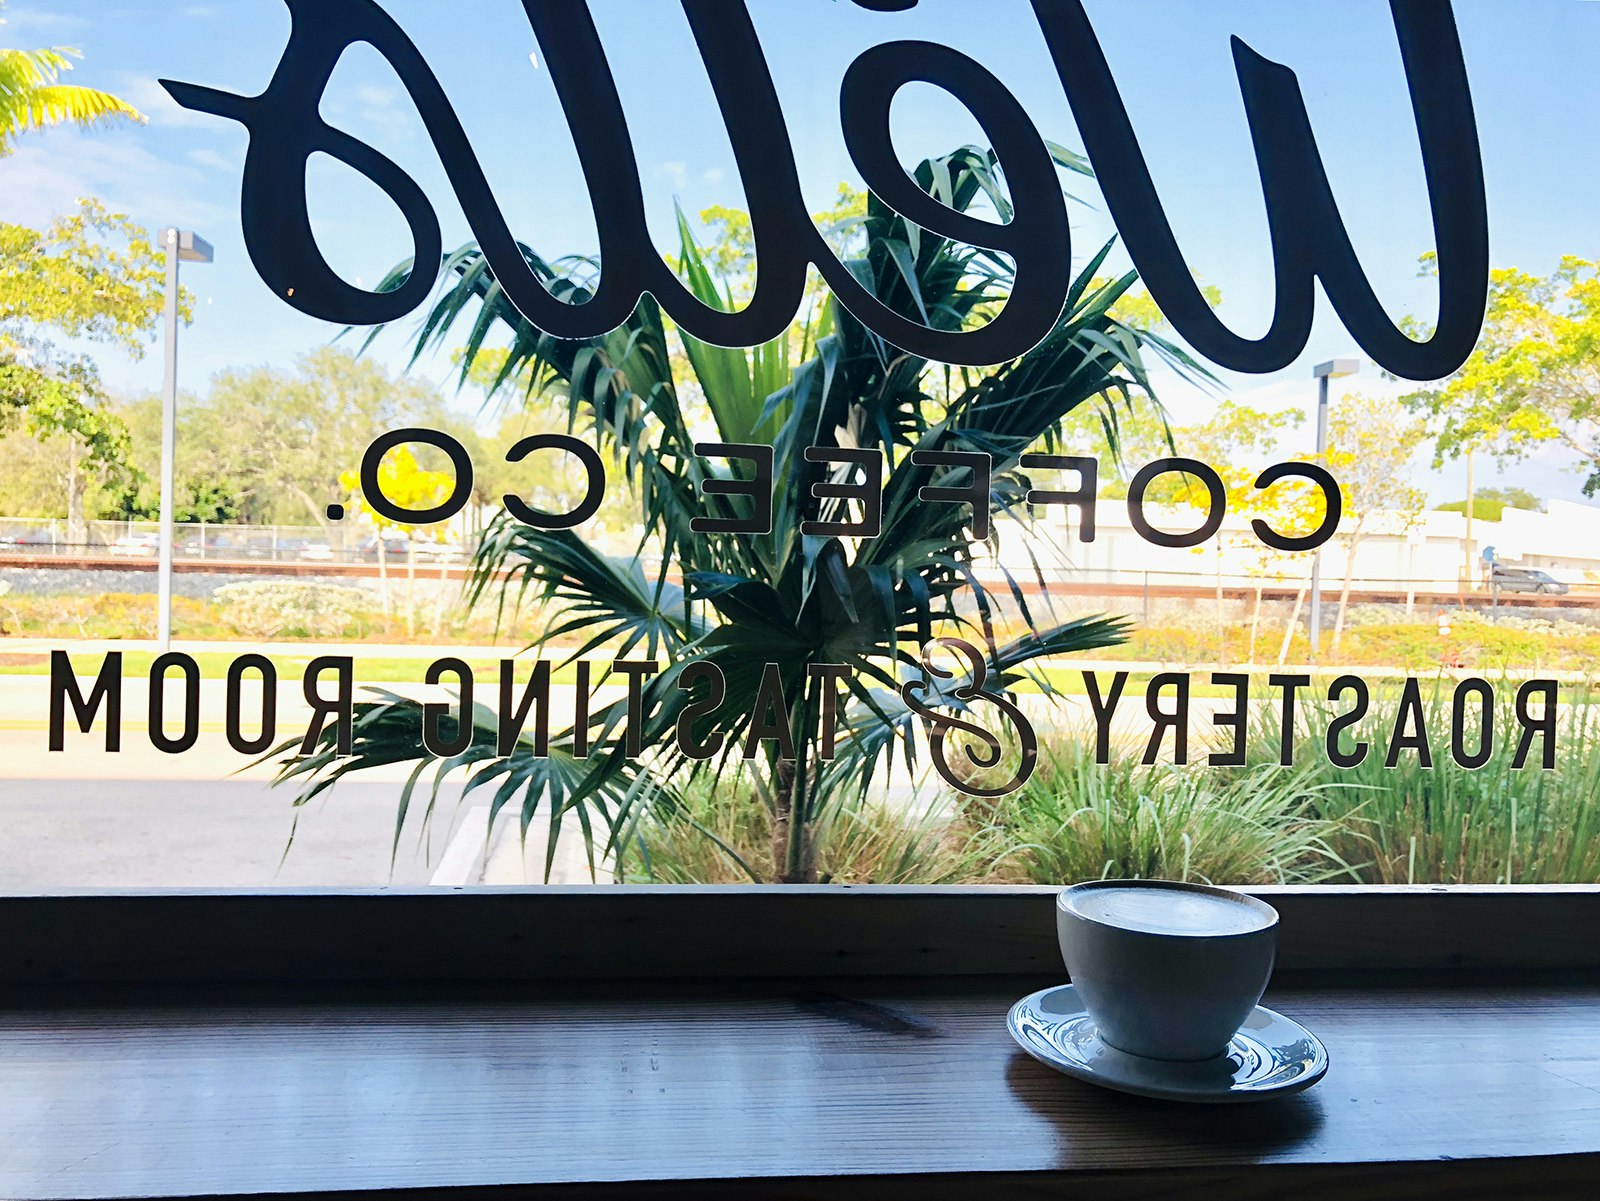 A latte sits on a wooden ledge behind a coffee shop's front window looking out over palm trees and a train track